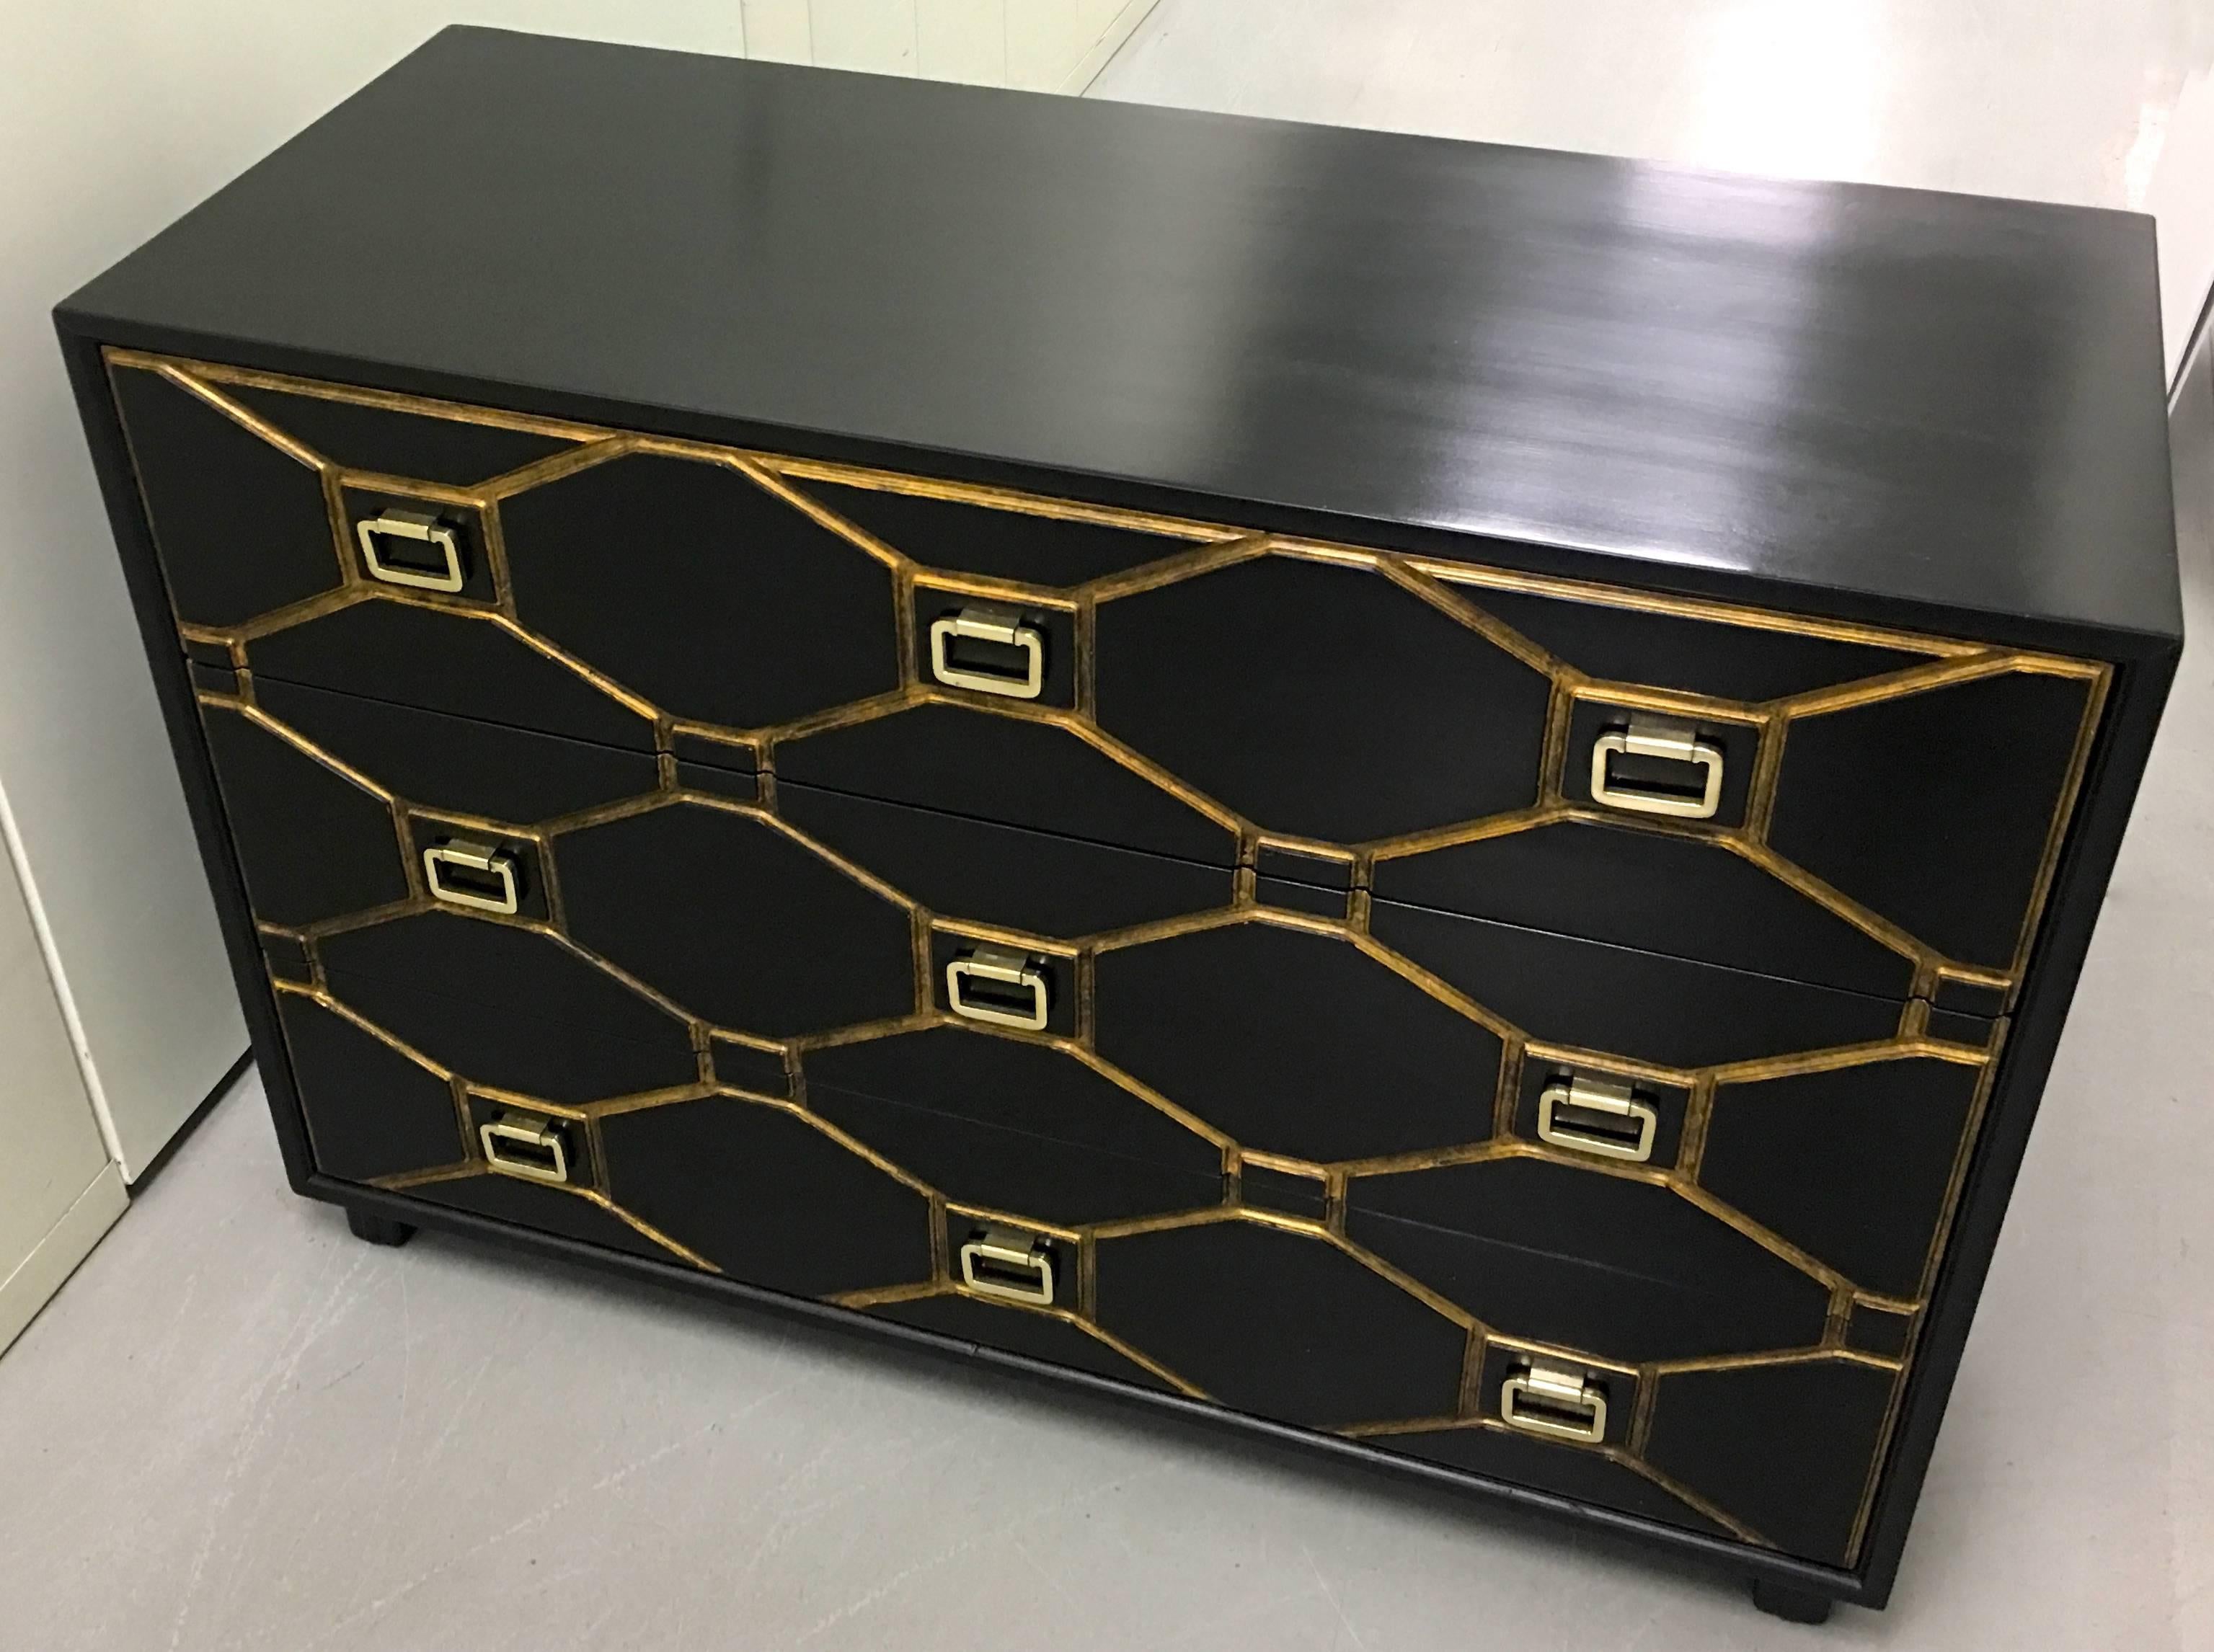 Dorothy Draper Viennese collection chest of drawers. Designed by Draper for Henredon. Three-drawer design with nine square brass pulls. Original black satin painted finish with burnished gold trim. Brass pulls are newly polished. The piece is